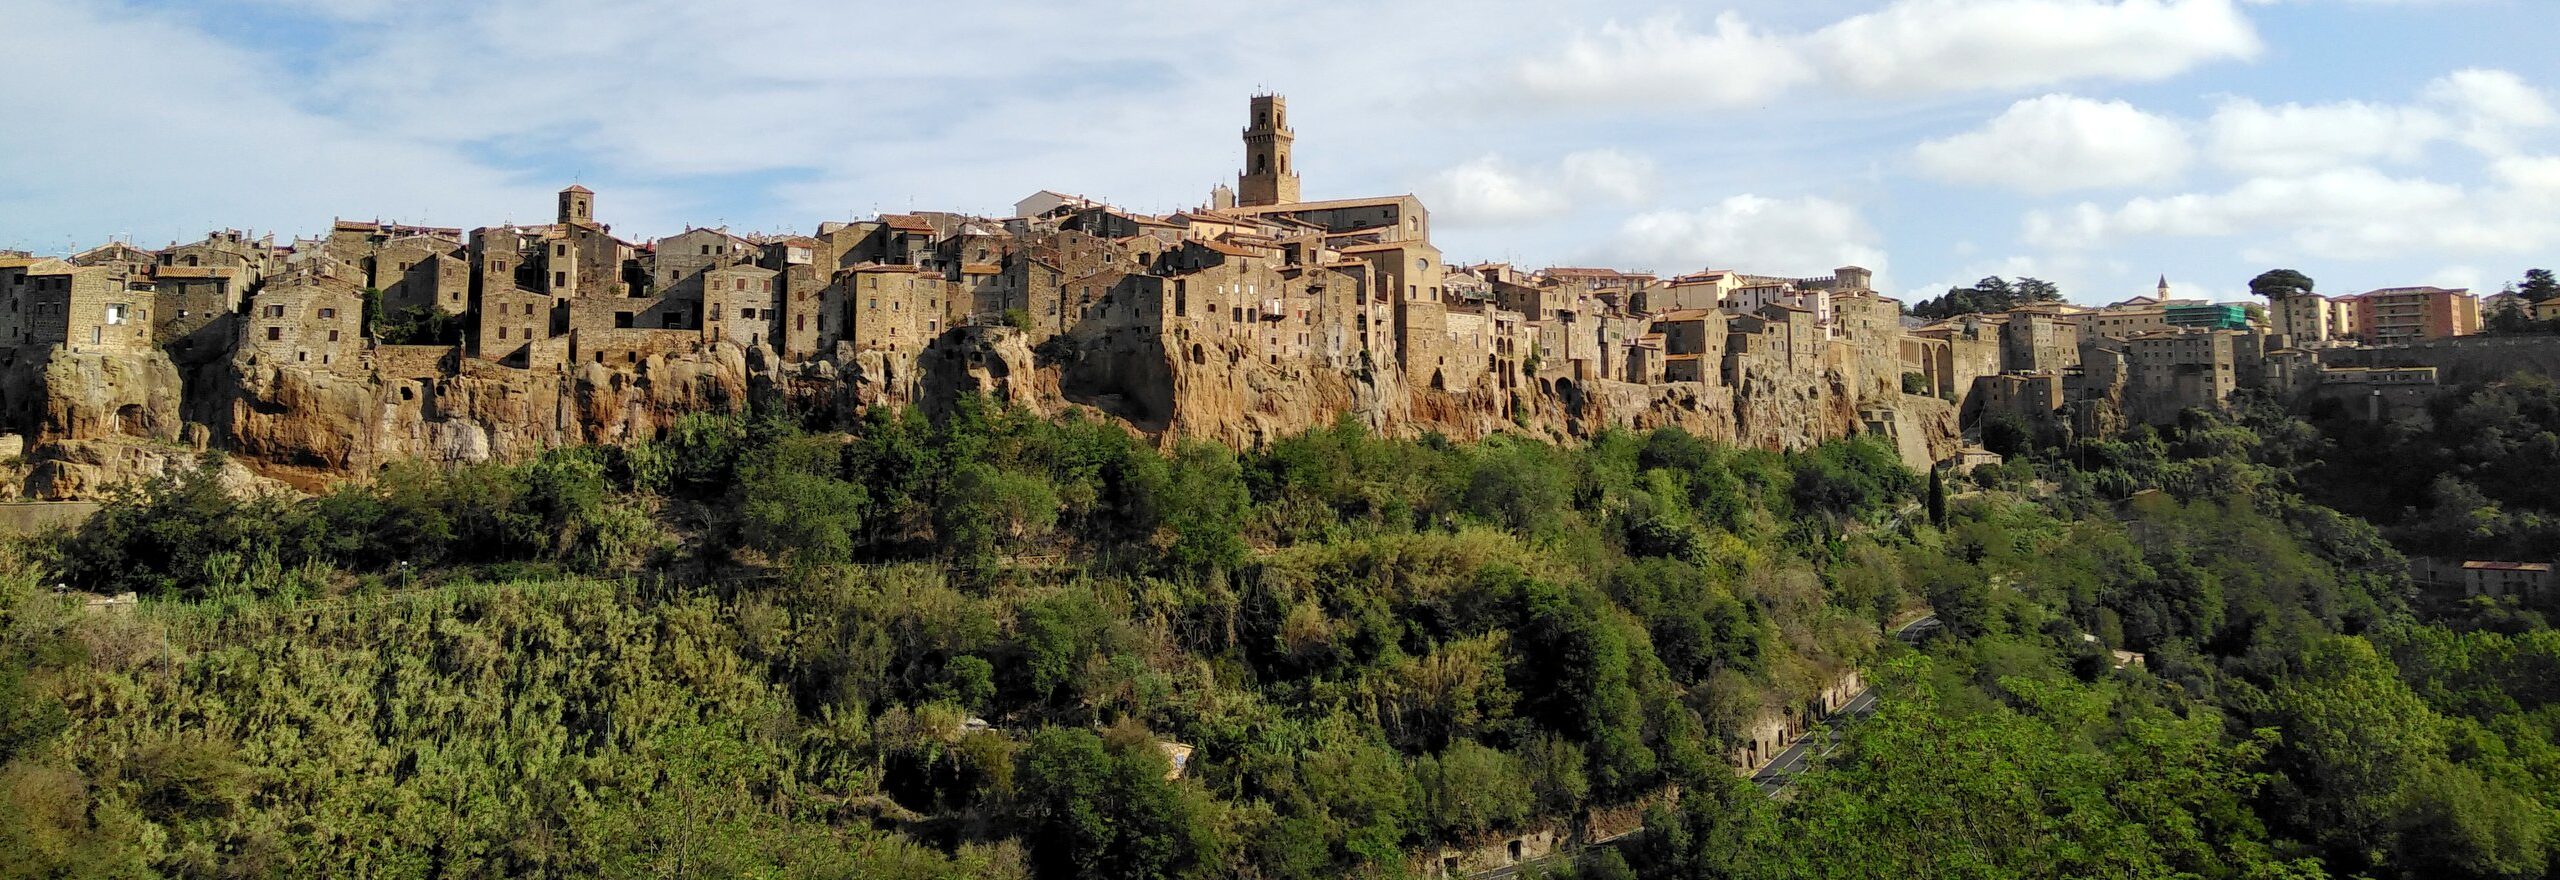 Explore the stunning Tufa Towns - including Pitigliano, on this guided bike tour in Tuscany